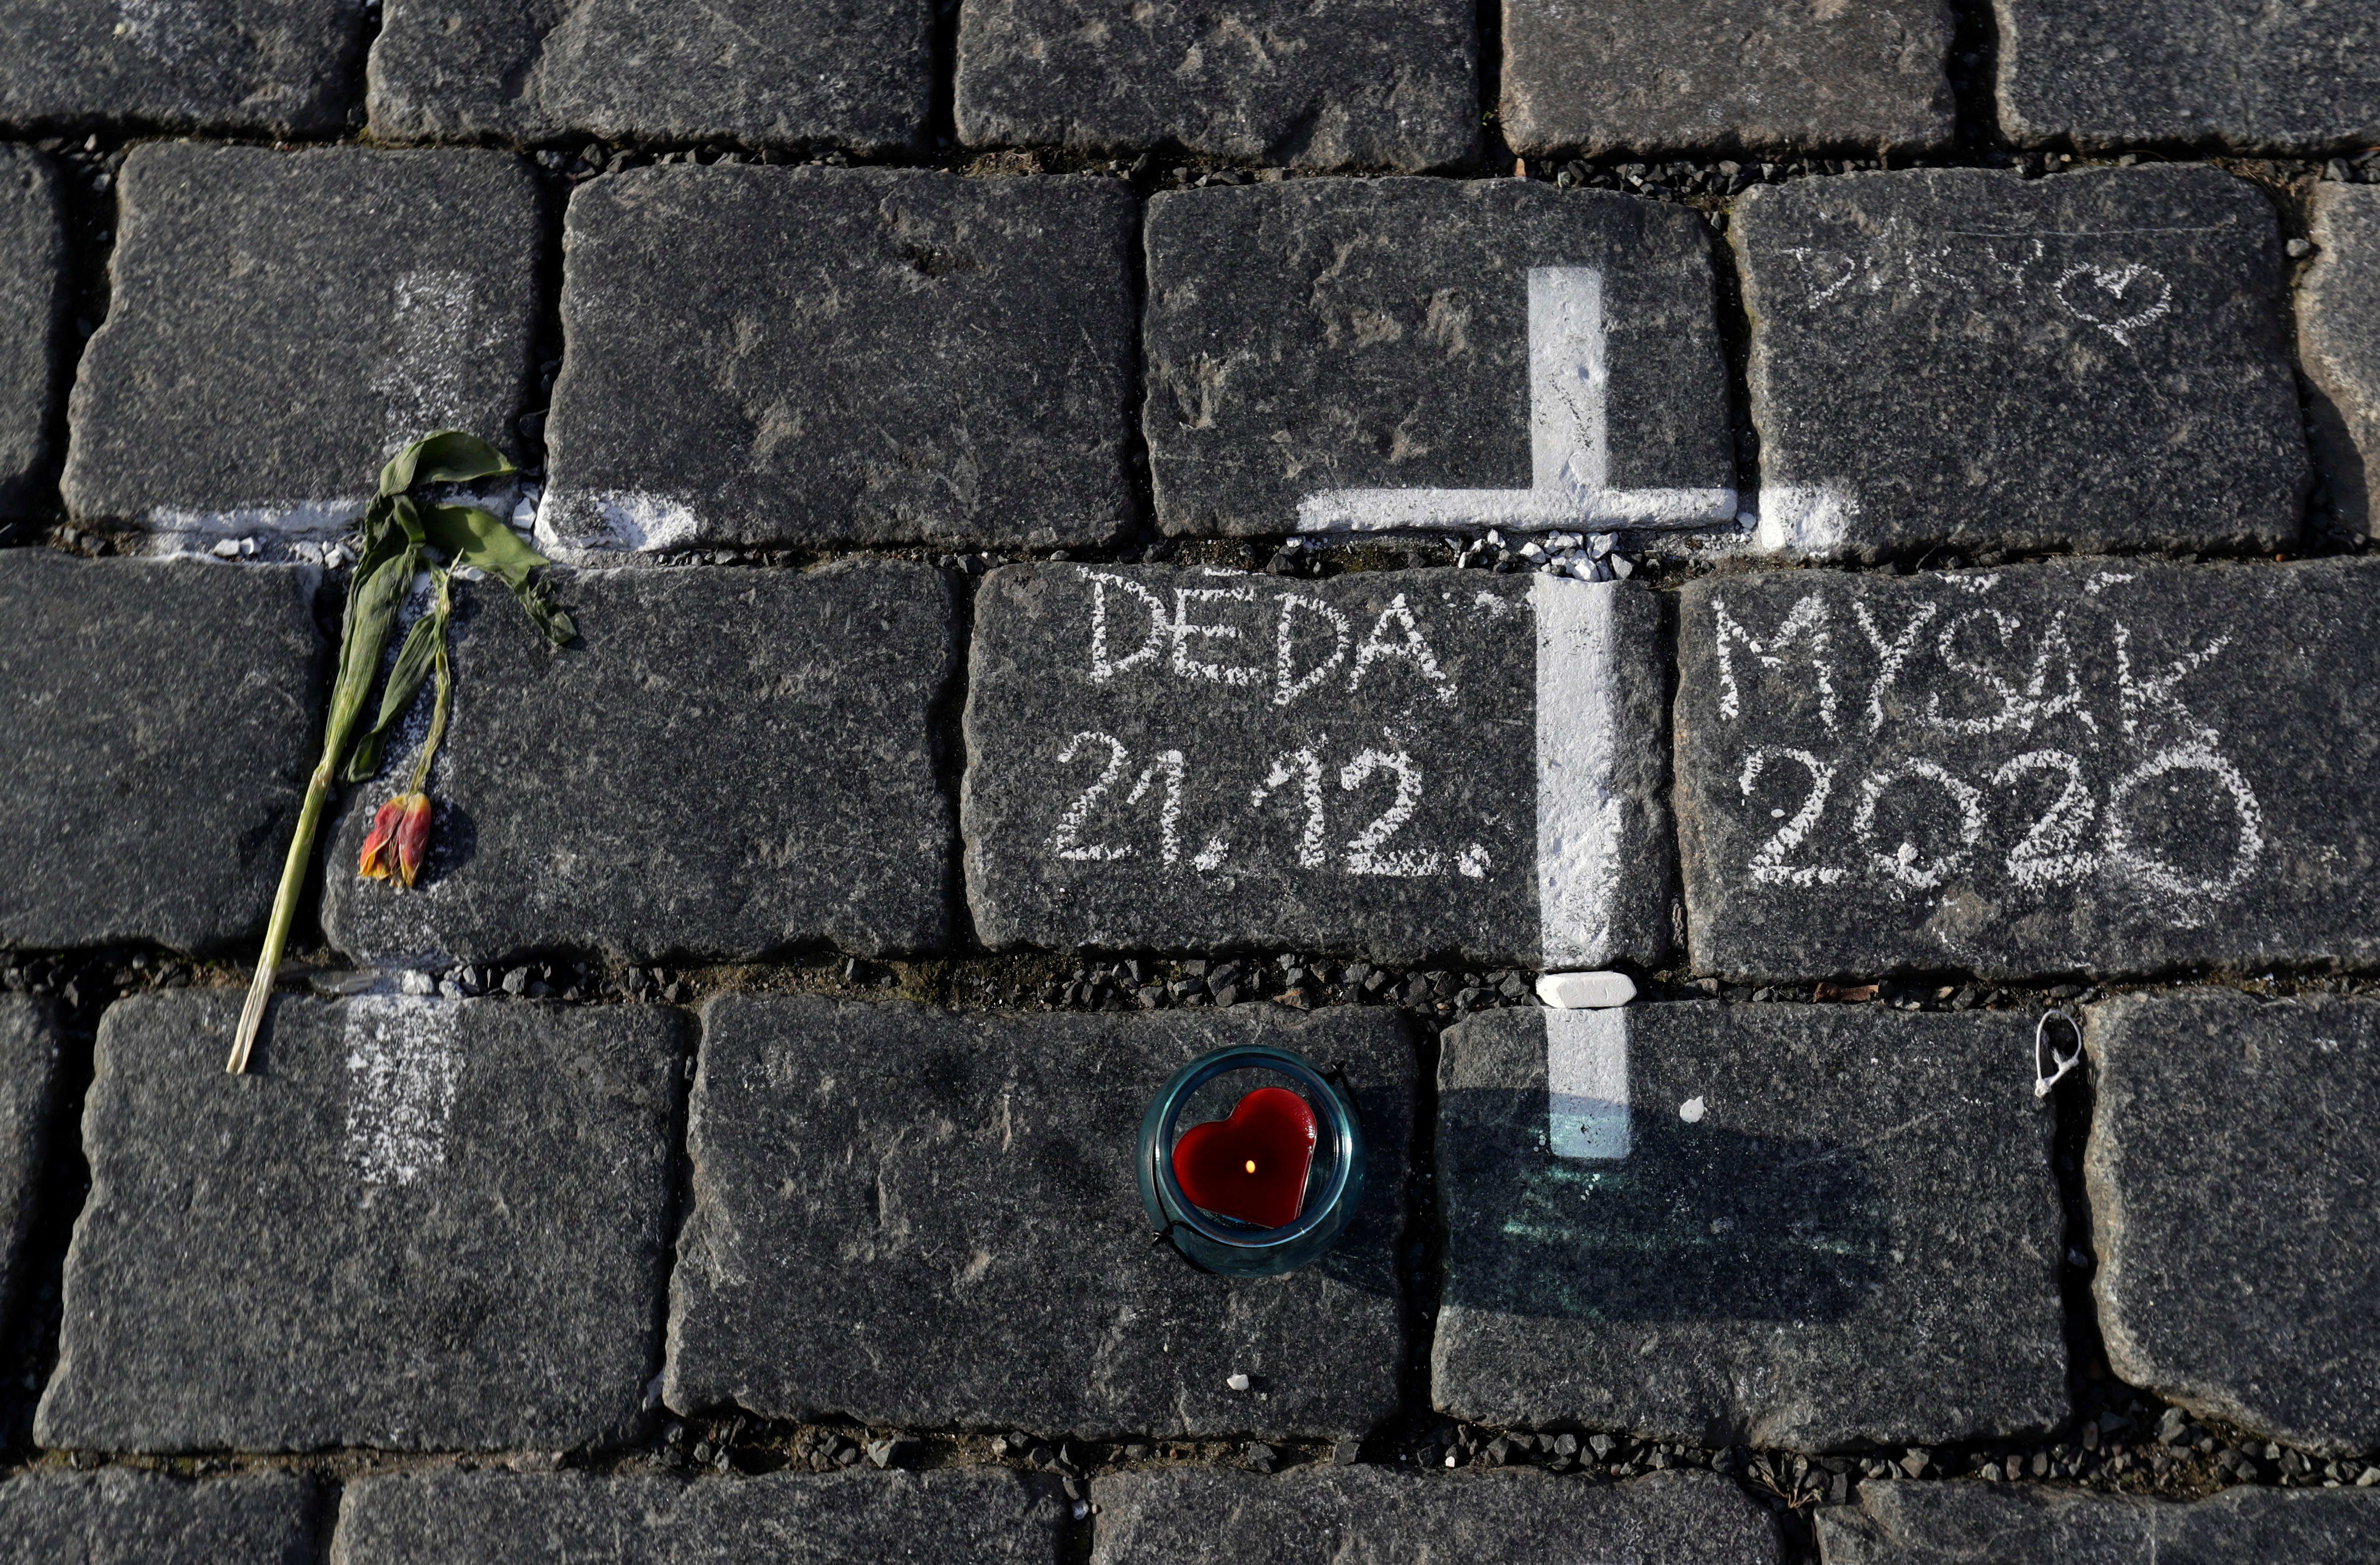 Thousands of crosses have been painted on a pavement in Old Town Square to commemorate a year since the first Covid death